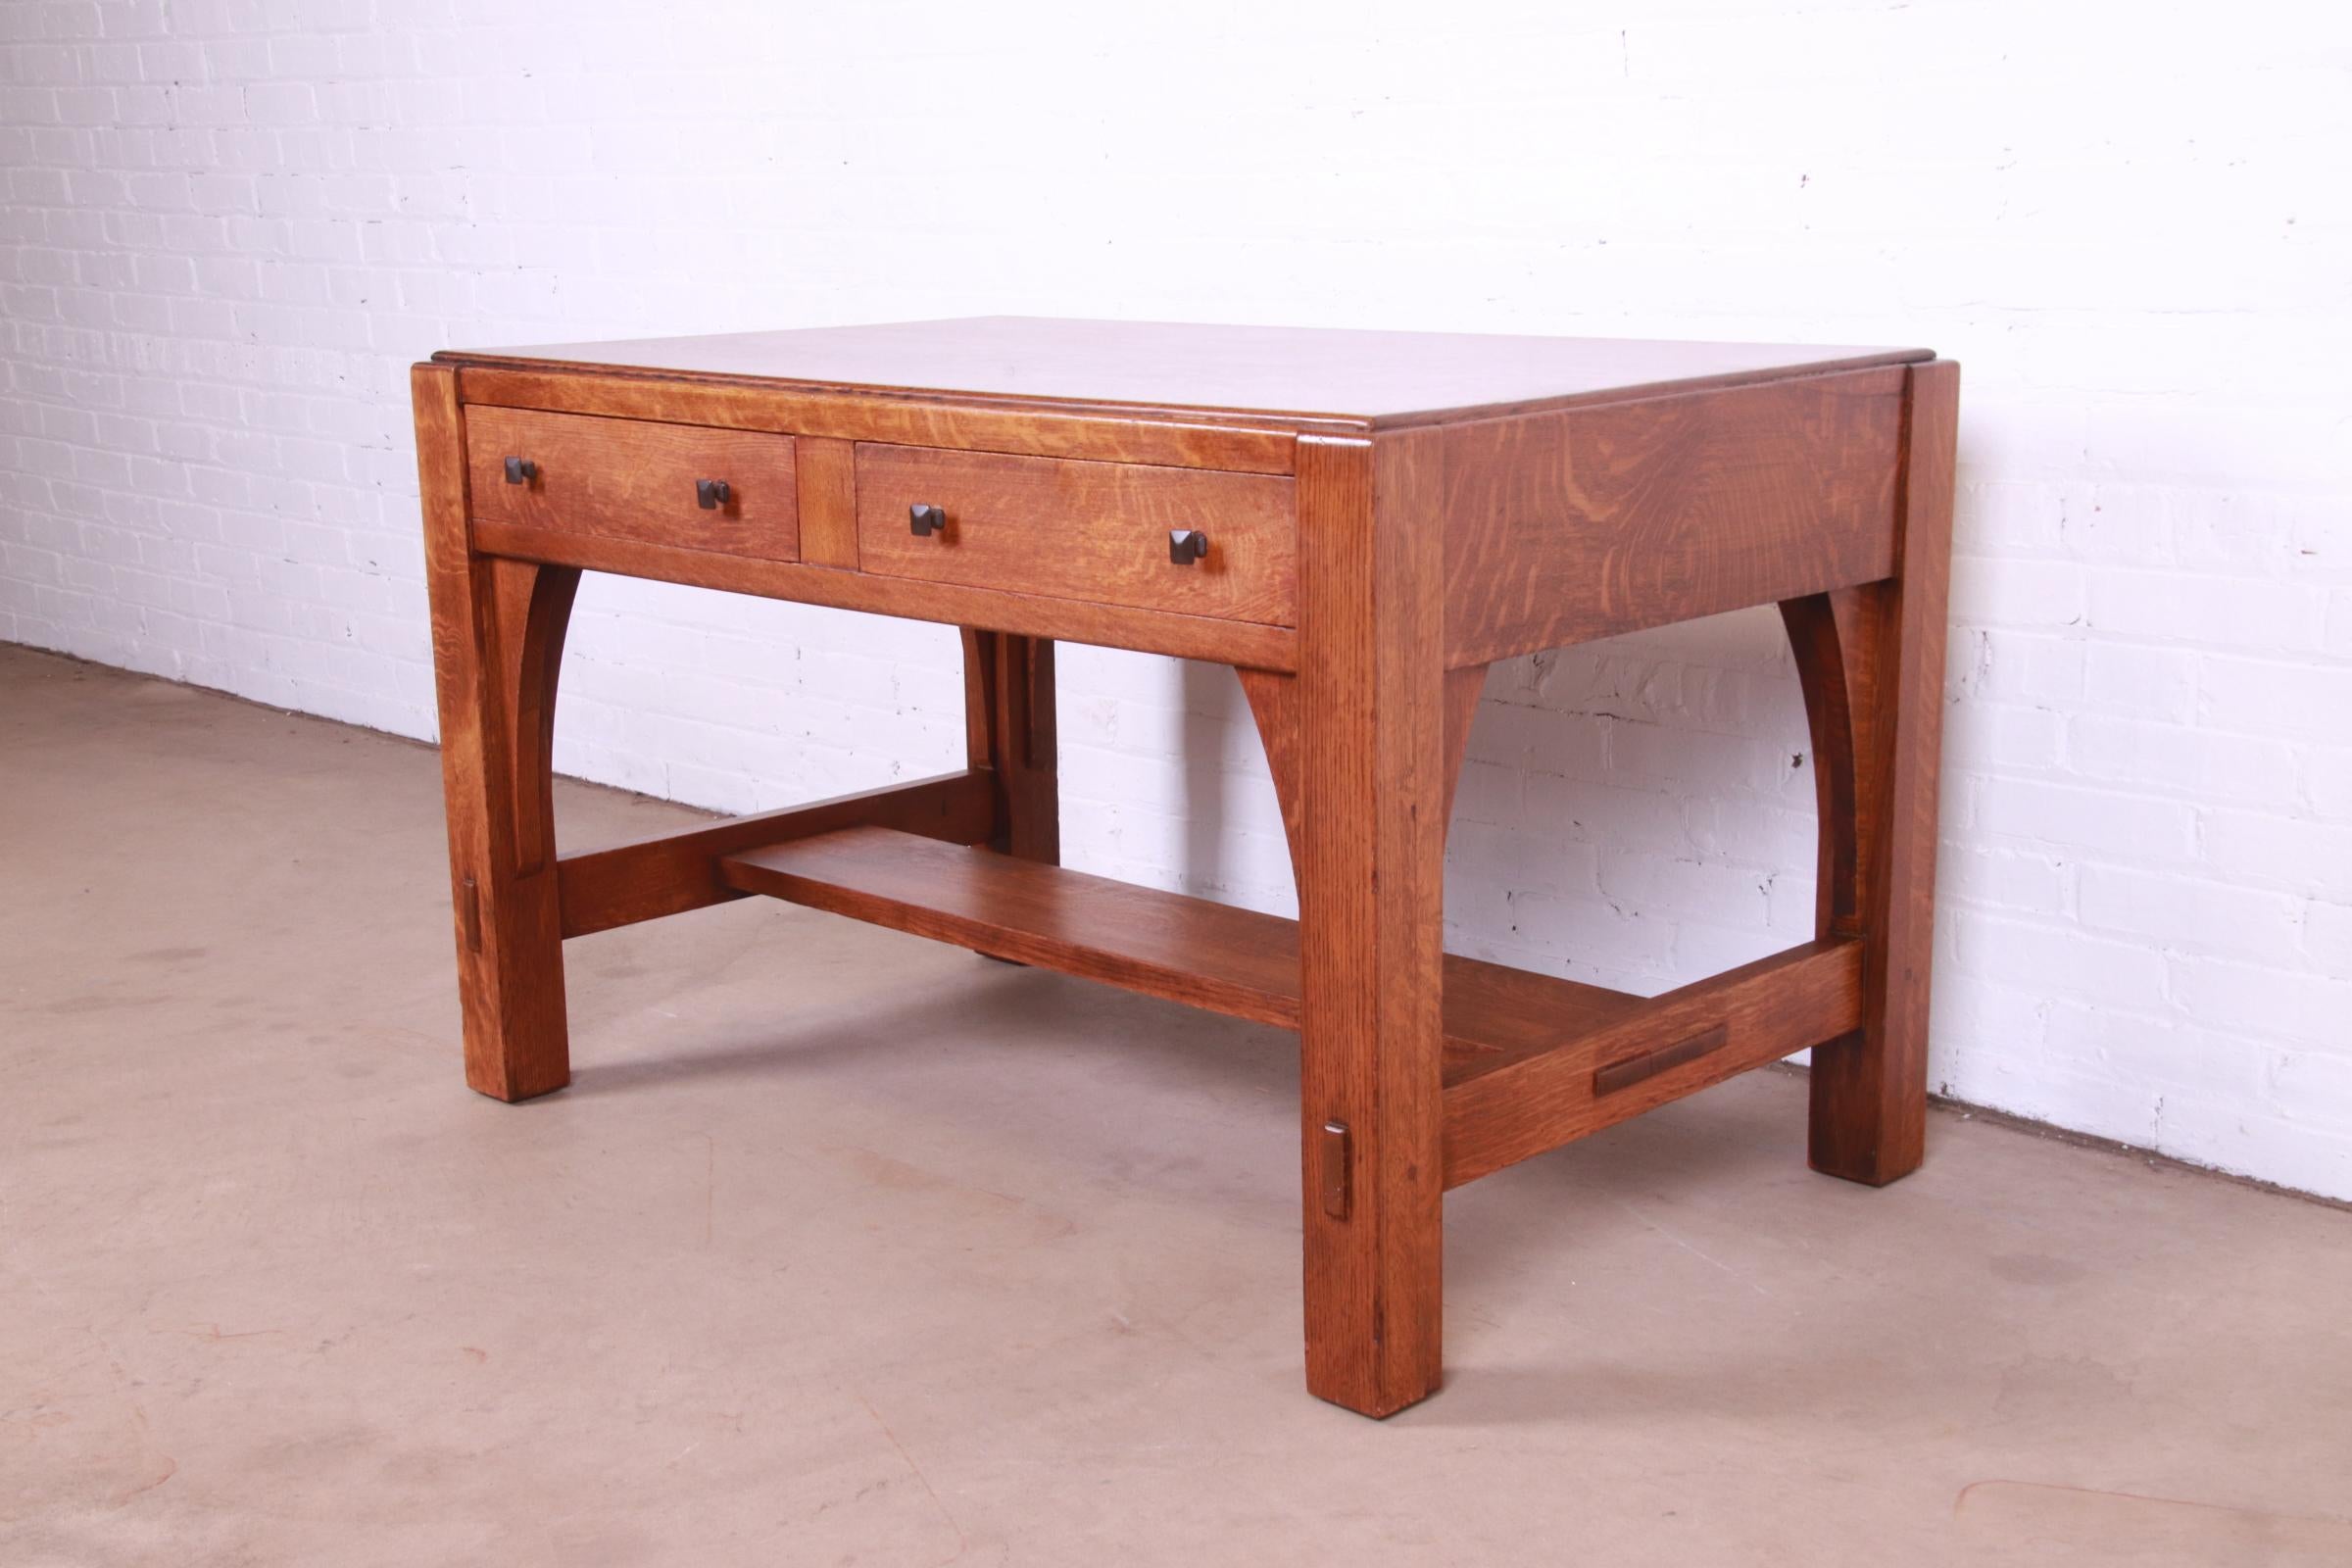 Arts and Crafts Limbert Mission Oak Arts & Crafts Desk or Library Table, Circa 1900